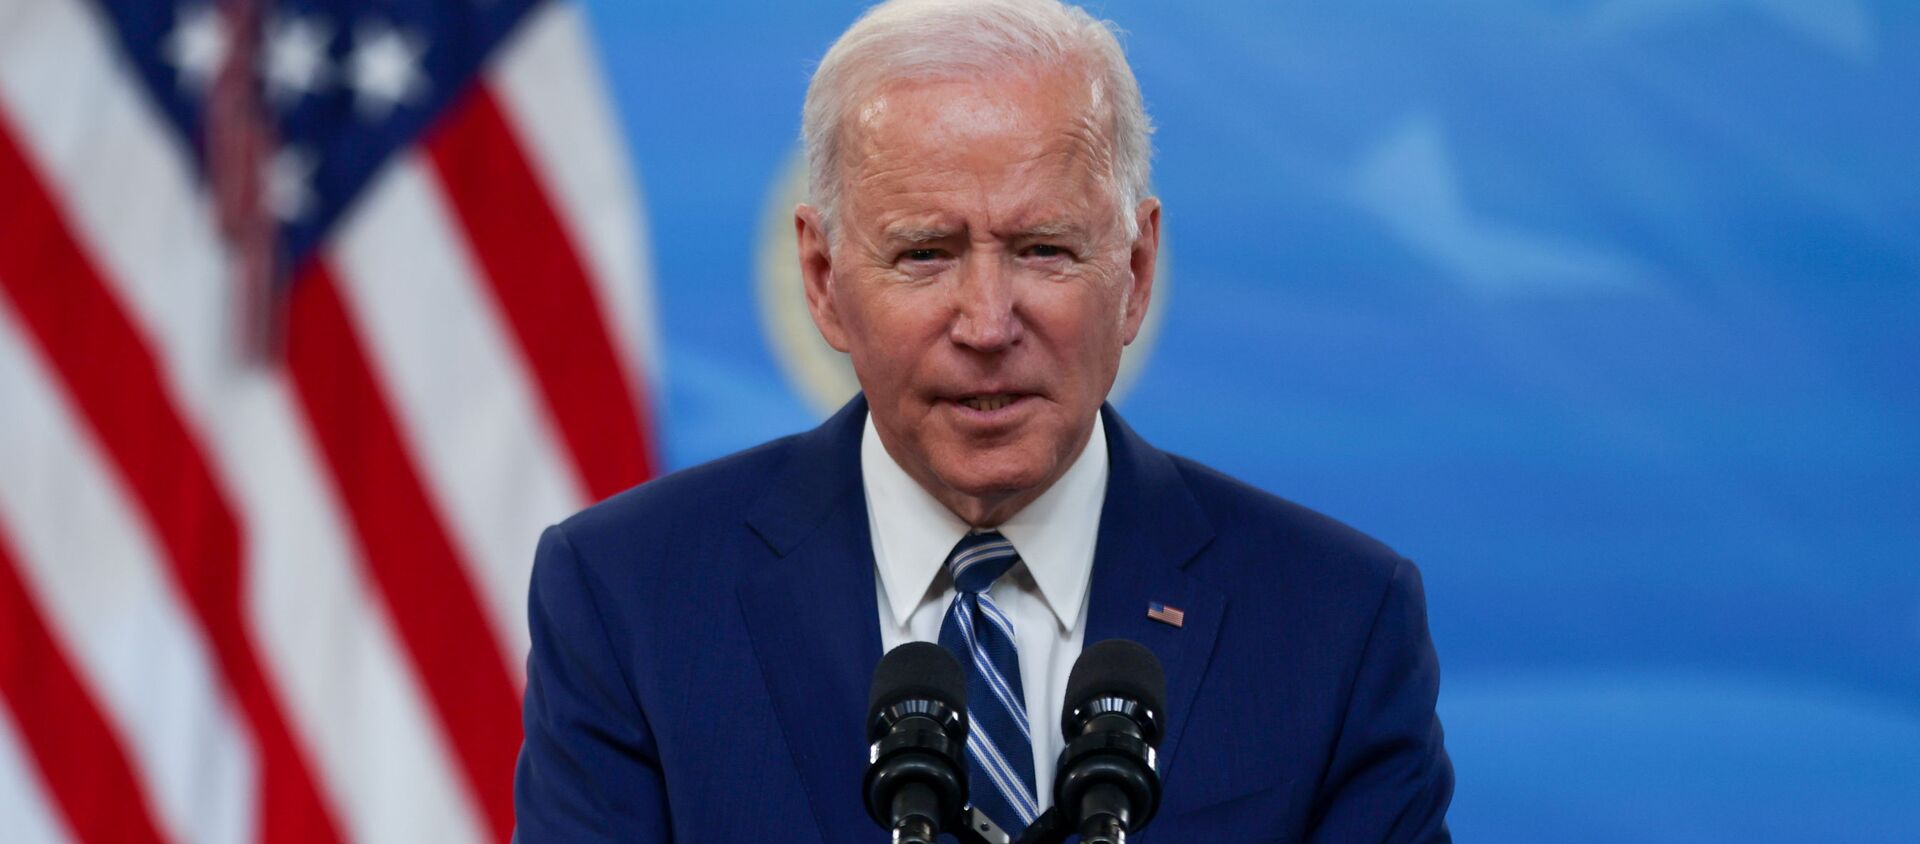 U.S. President Joe Biden delivers remarks after a meeting with his COVID-19 Response Team on the coronavirus disease (COVID-19) pandemic and the state of vaccinations, on the White House campus in Washington, U.S., March 29, 2021. - Sputnik International, 1920, 30.03.2021